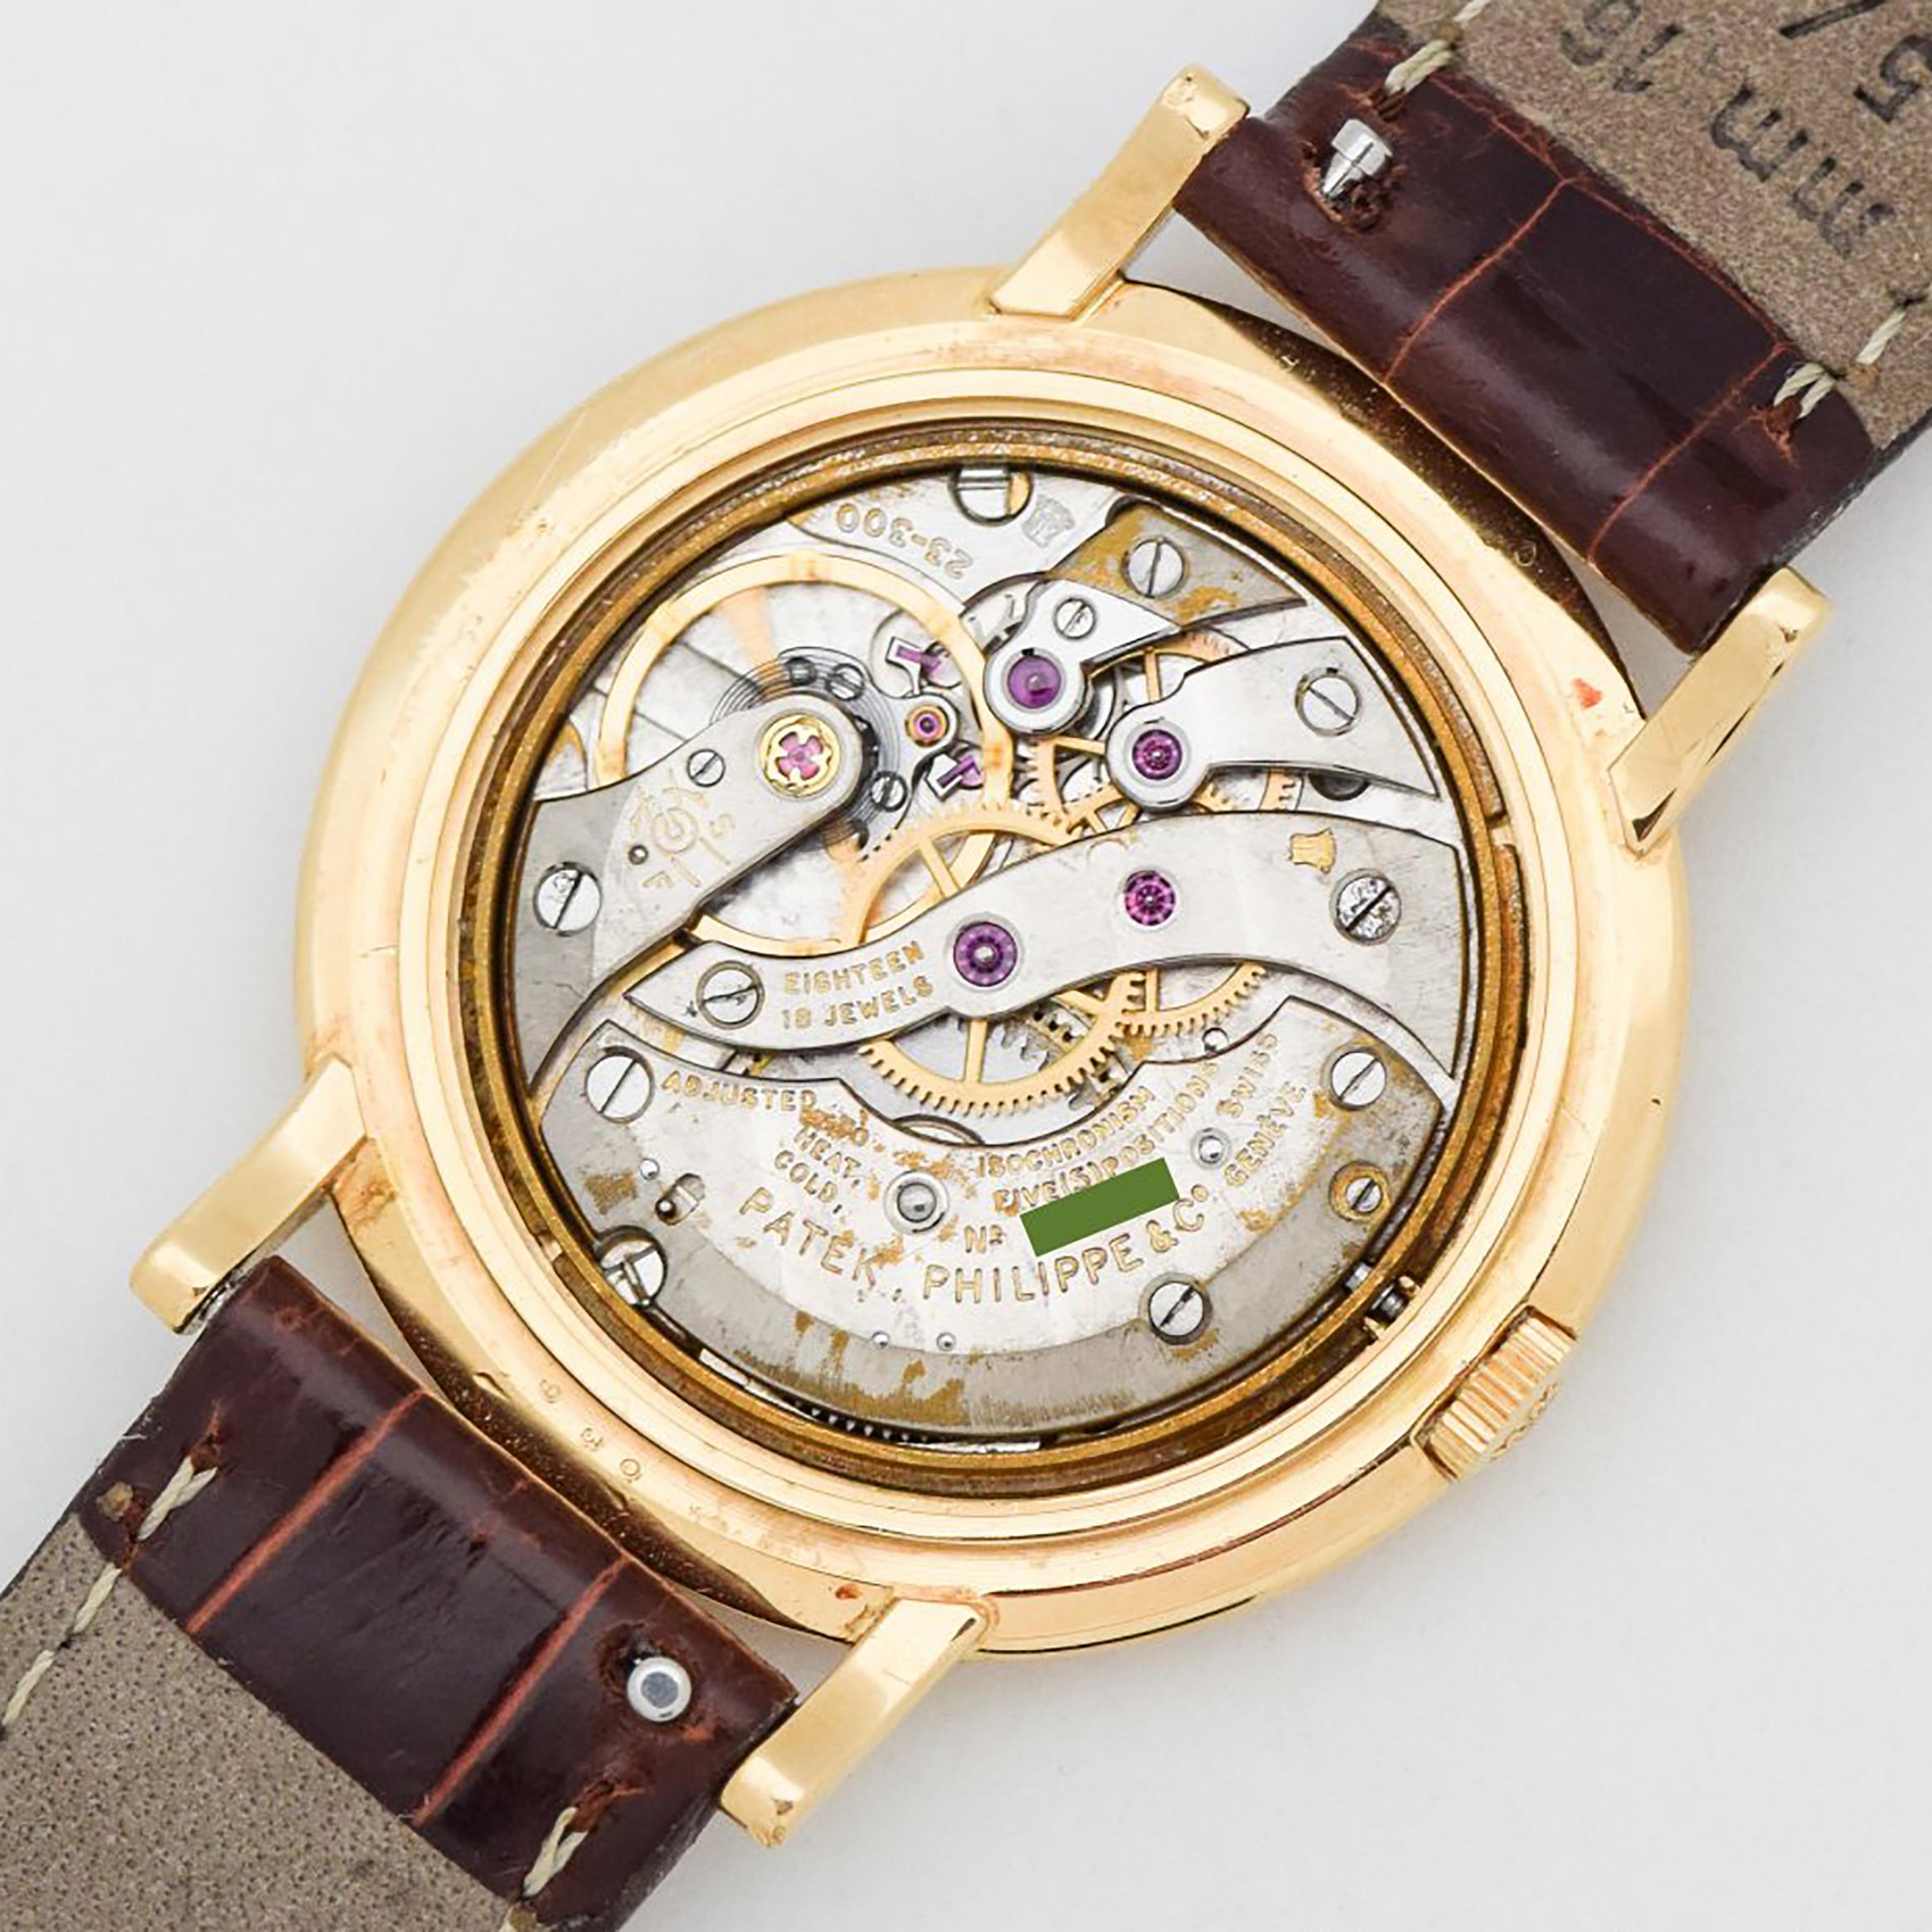 Vintage Patek Philippe Reference 2594 Watch, 1958 For Sale 4